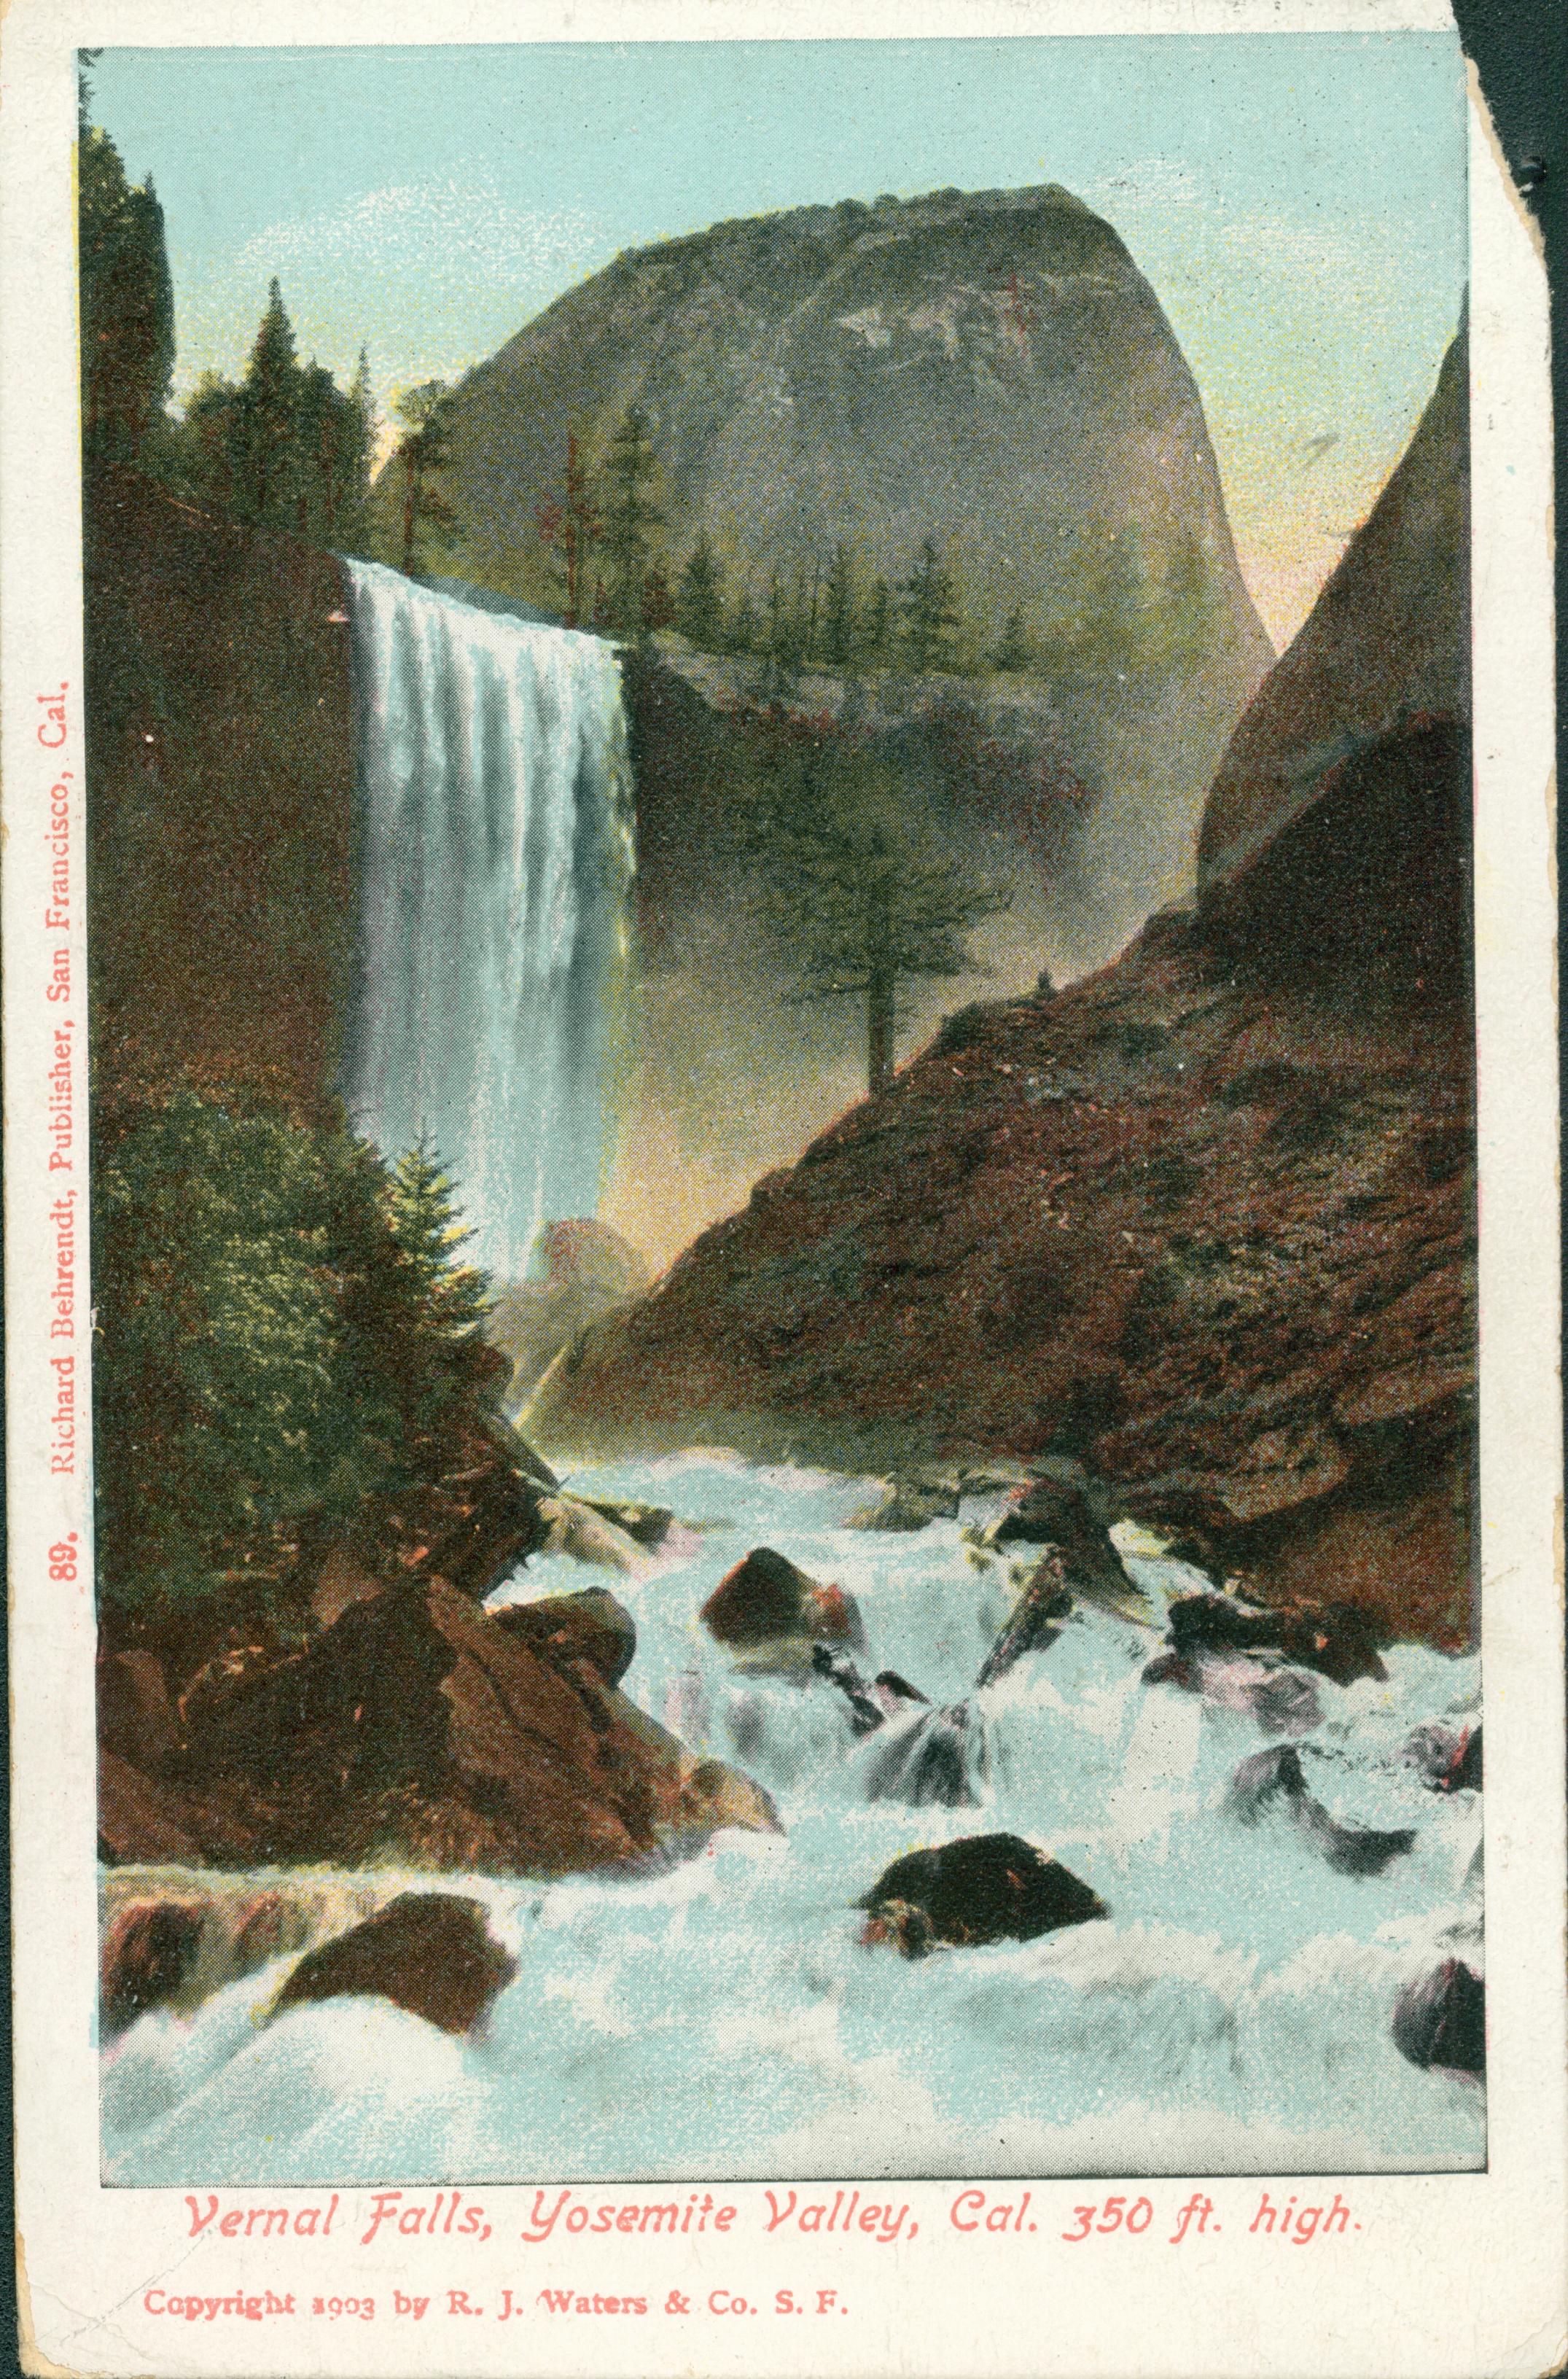 Shows a view of Vernal Falls